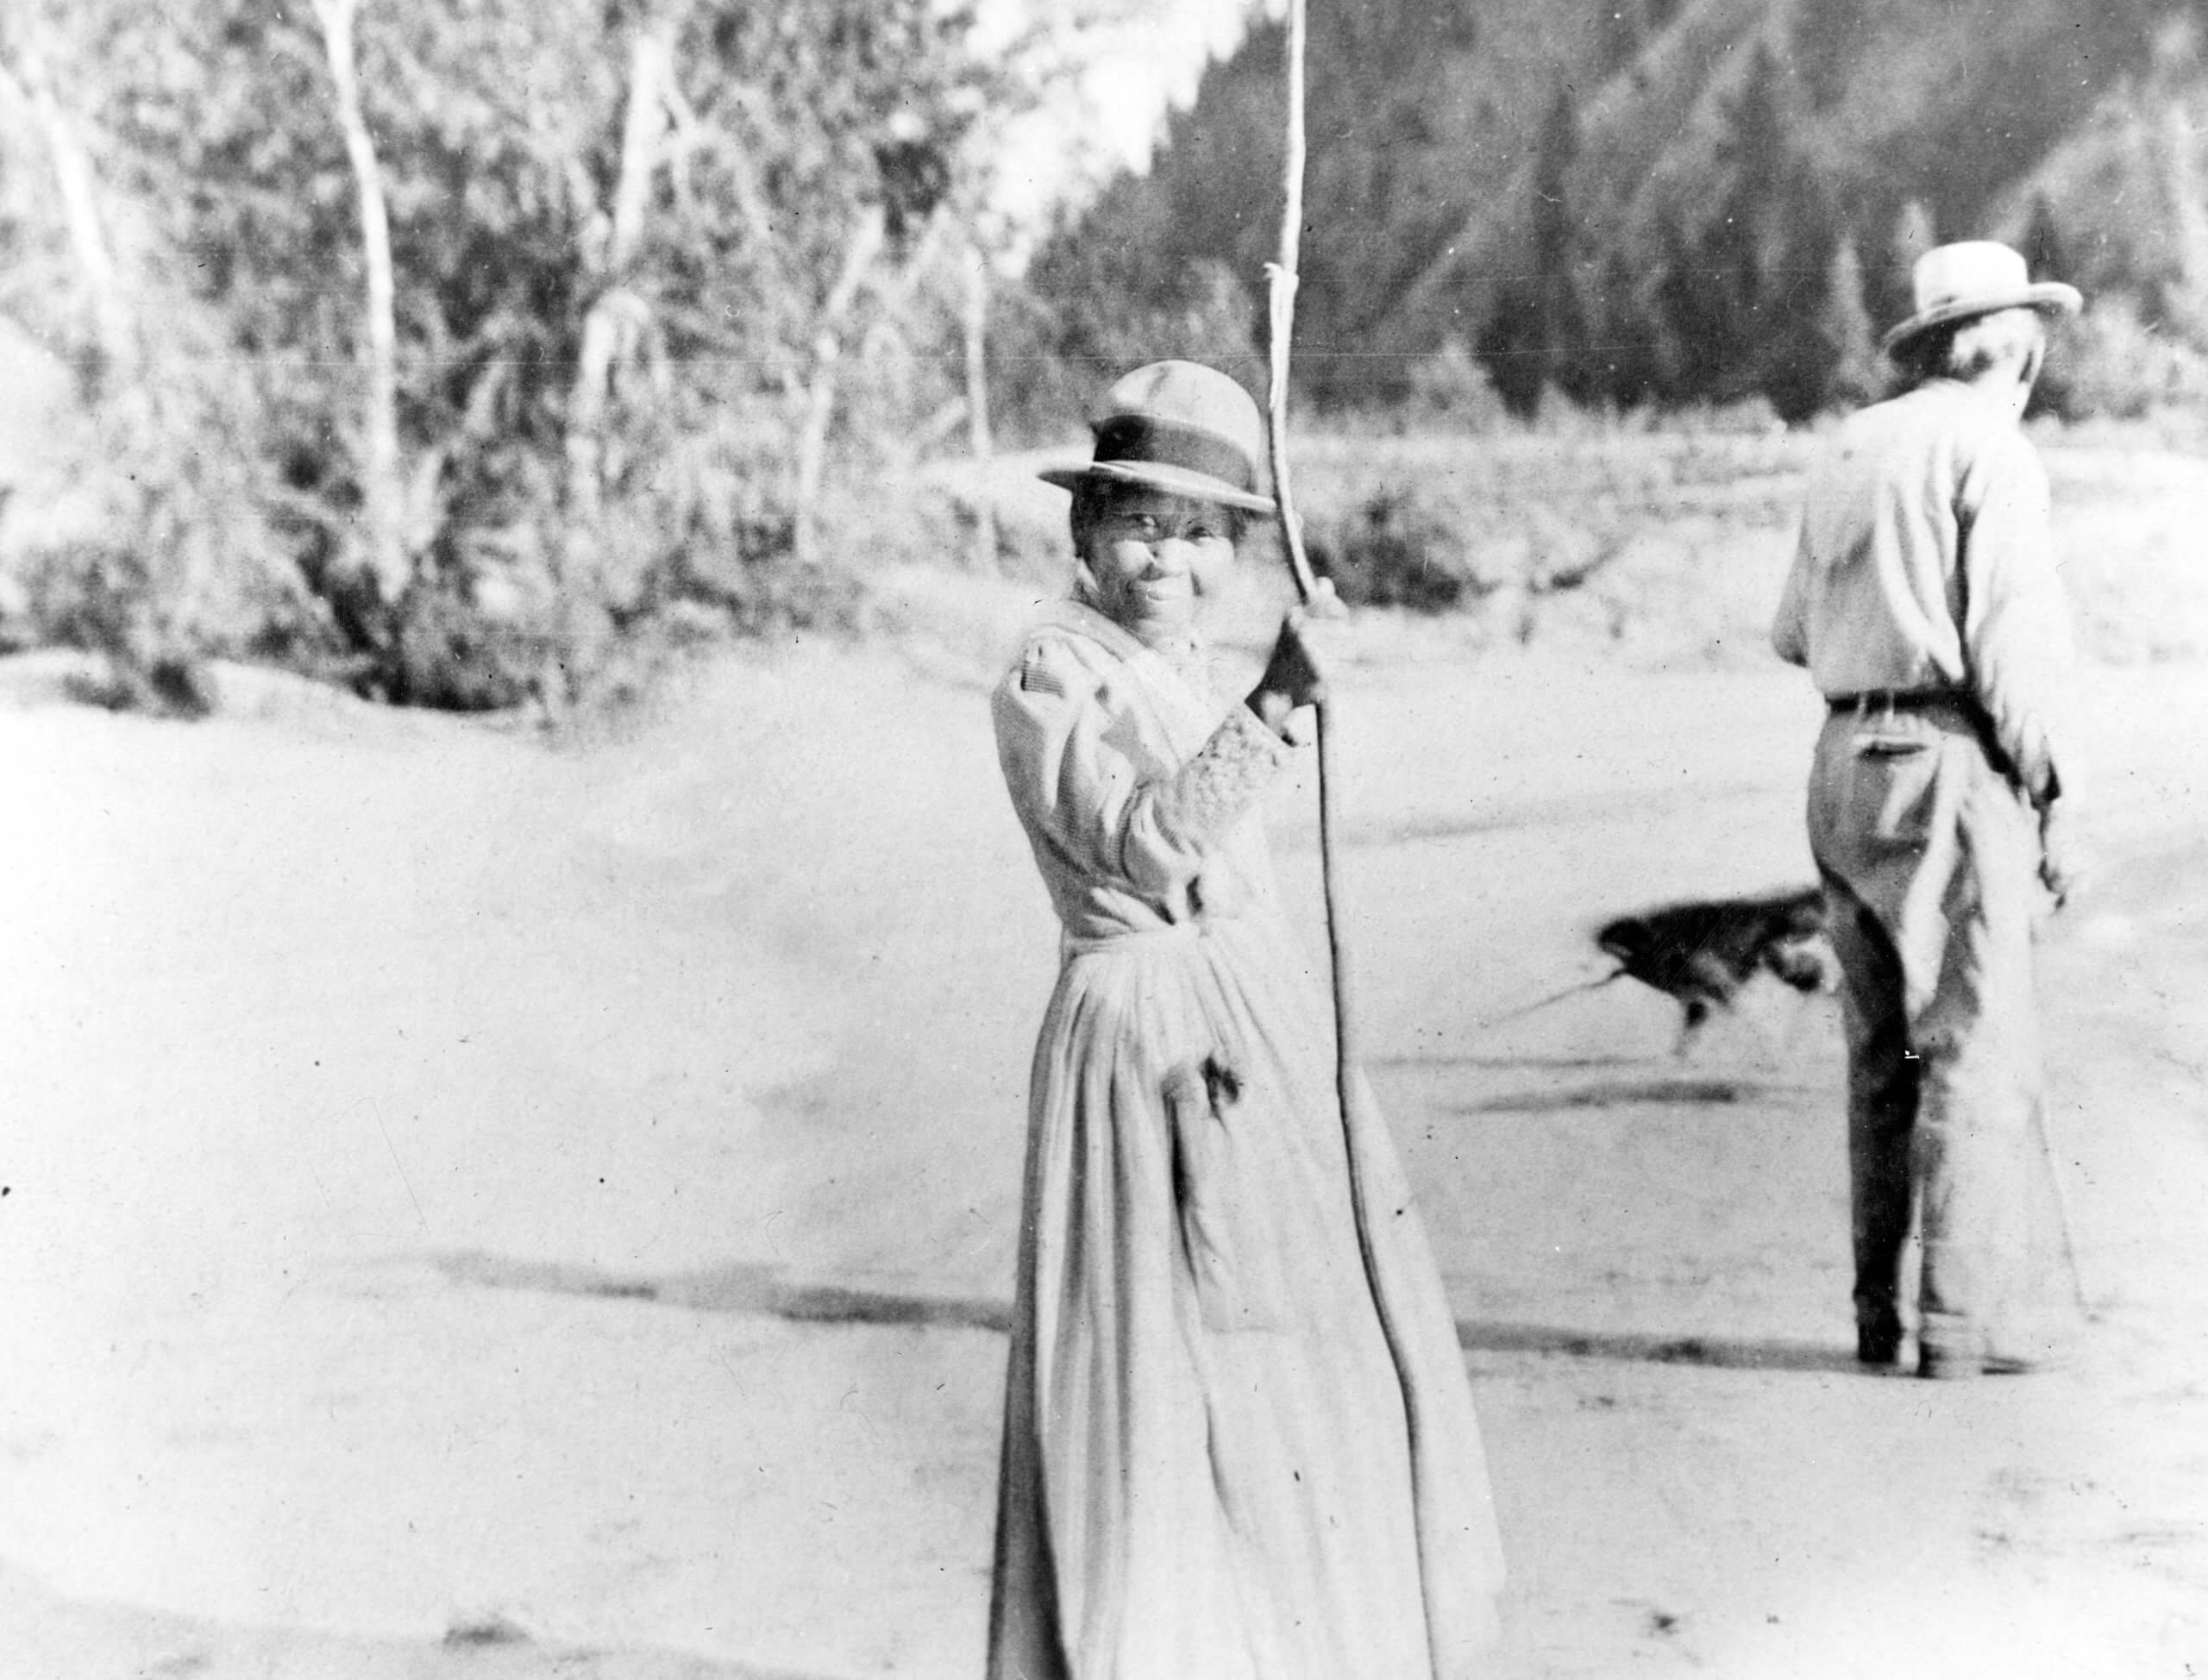 A black-and-white photo of Polly Bemis standing looking at the camera holding a large walking stick.